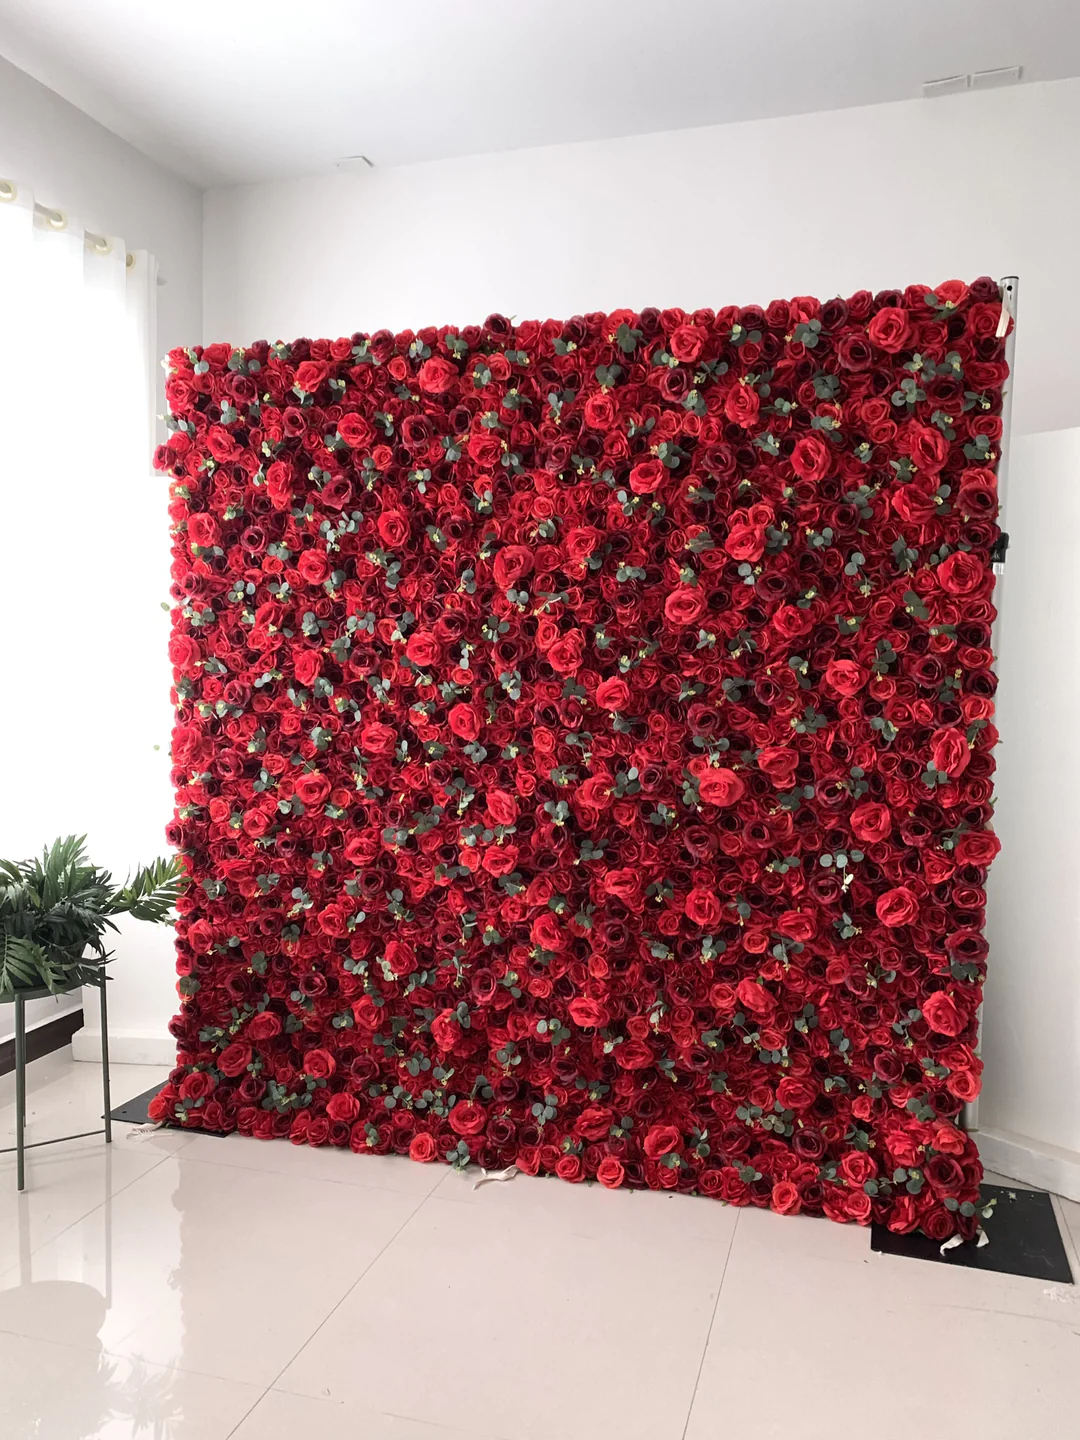 Red Rose Wall Rental 2 - Riverside Flower Wall Rental - Perfect Capture Booth | Photo Booth Rental.png